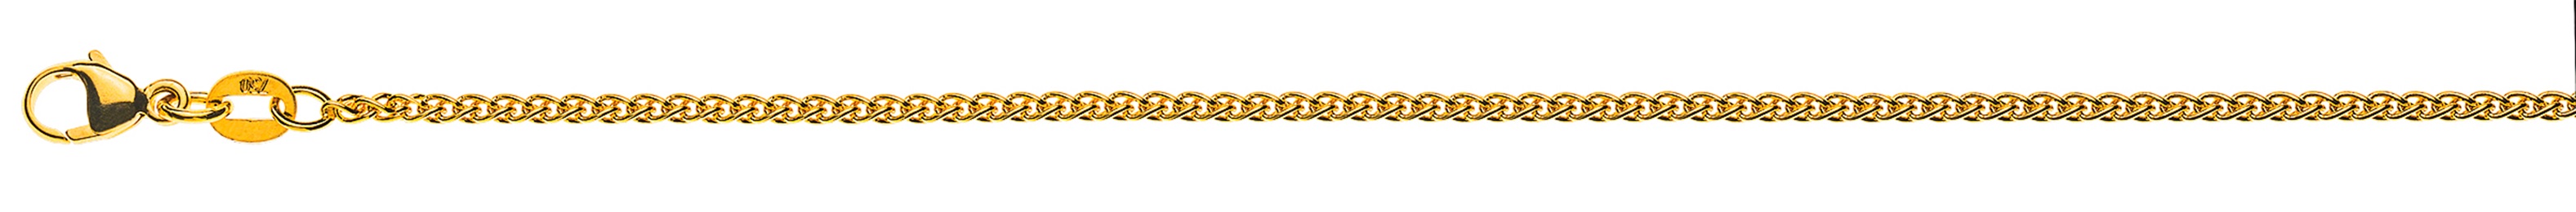 AURONOS Style Necklace yellow gold 9K cable chain 60cm 1.65mm